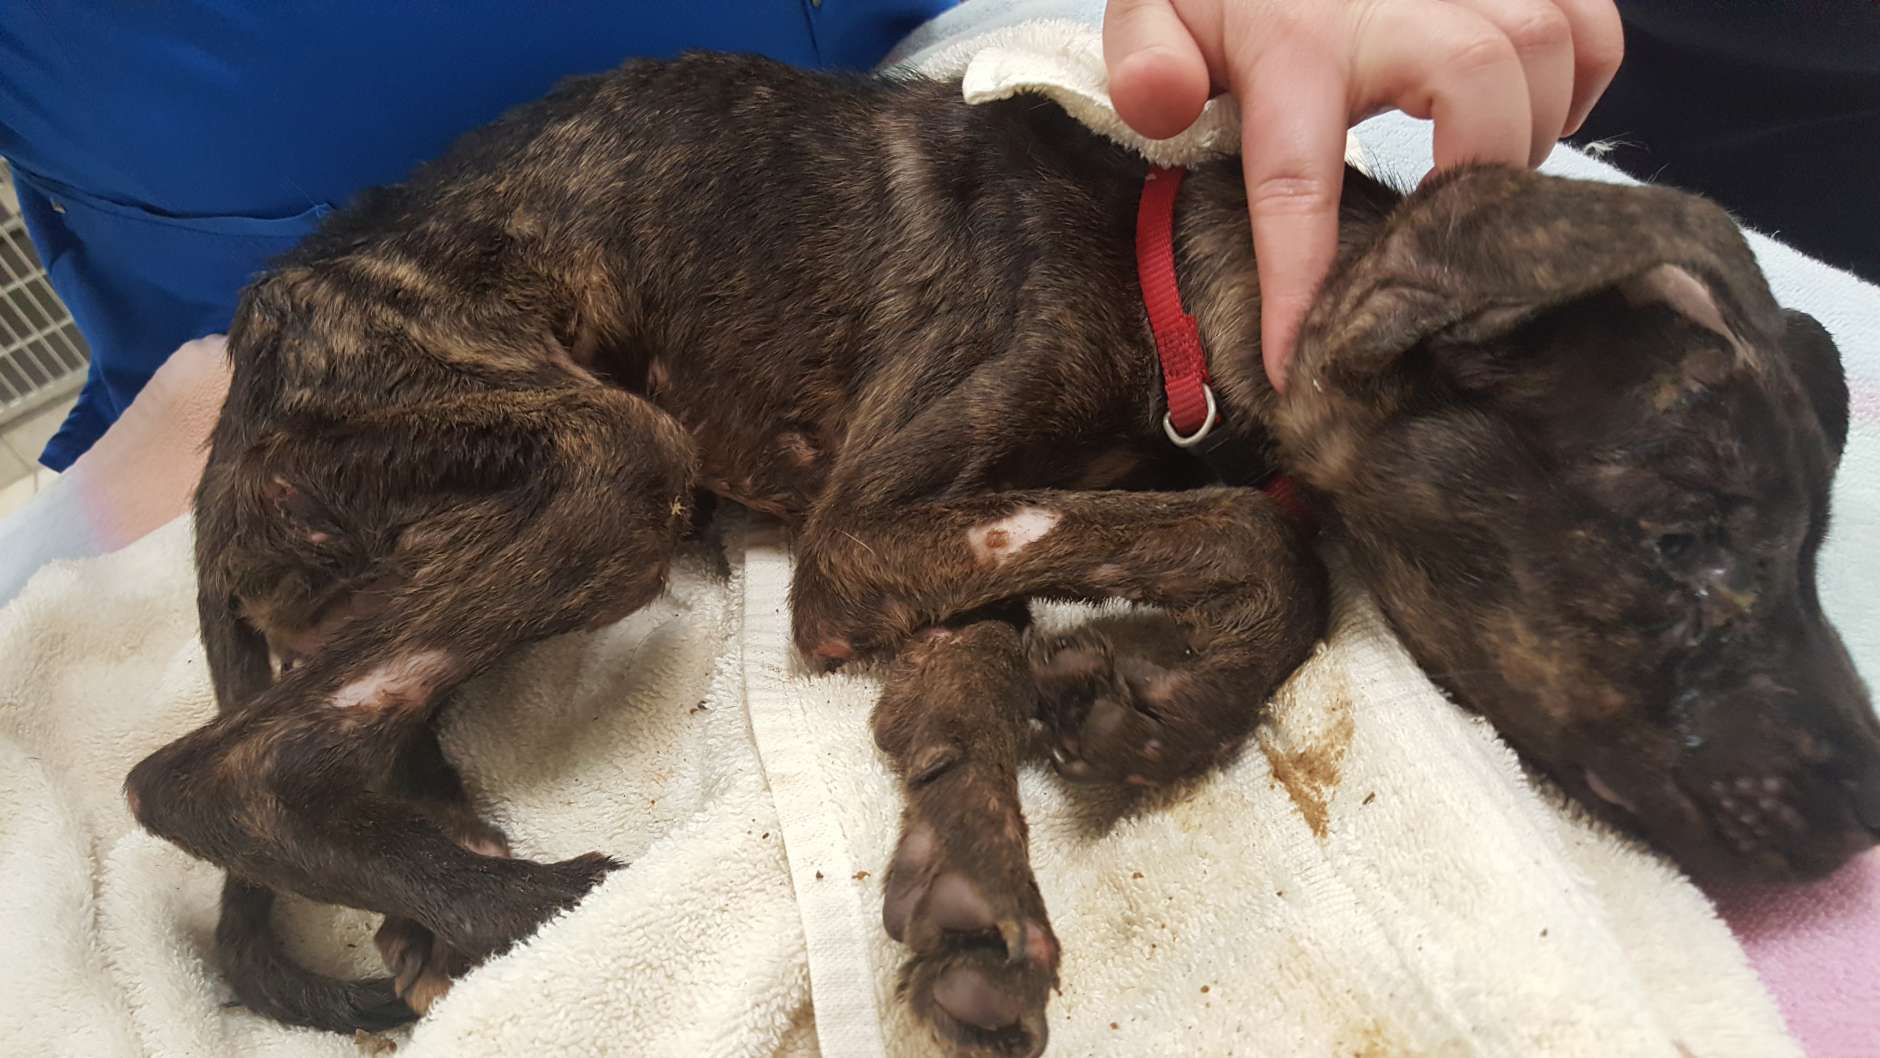 Veterinarians said the dog, nicknamed "Eddy" has been responding well to medical treatment. The animal shelter has received multiple requests to adopt the puppy, according to the news release. (Courtesy of Howard County Police Department)